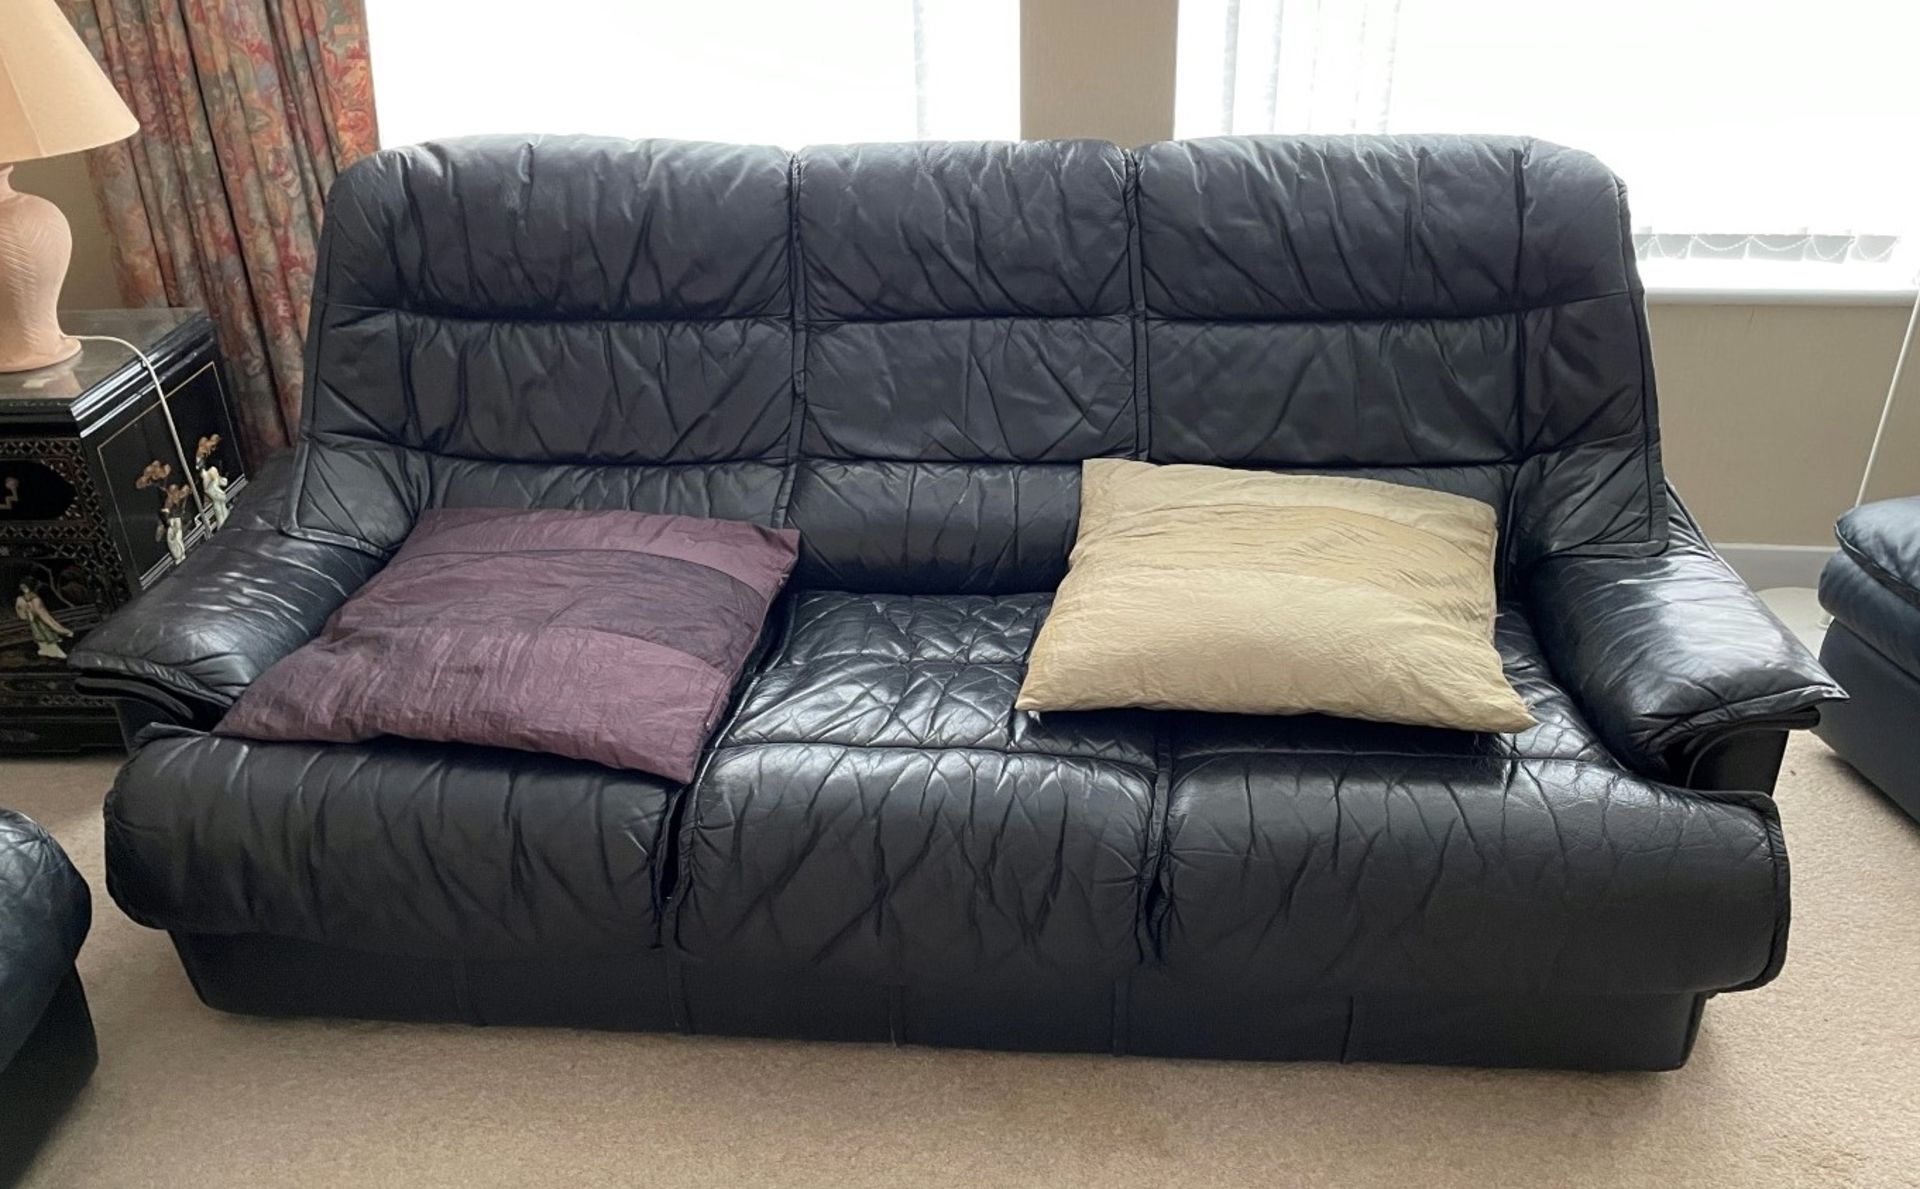 3-Piece Sofa Set In Black - Includes 1 x 3-Seater Sofa, 1 x 2-Seater Sofa & 1 x Footstool - From - Image 3 of 11